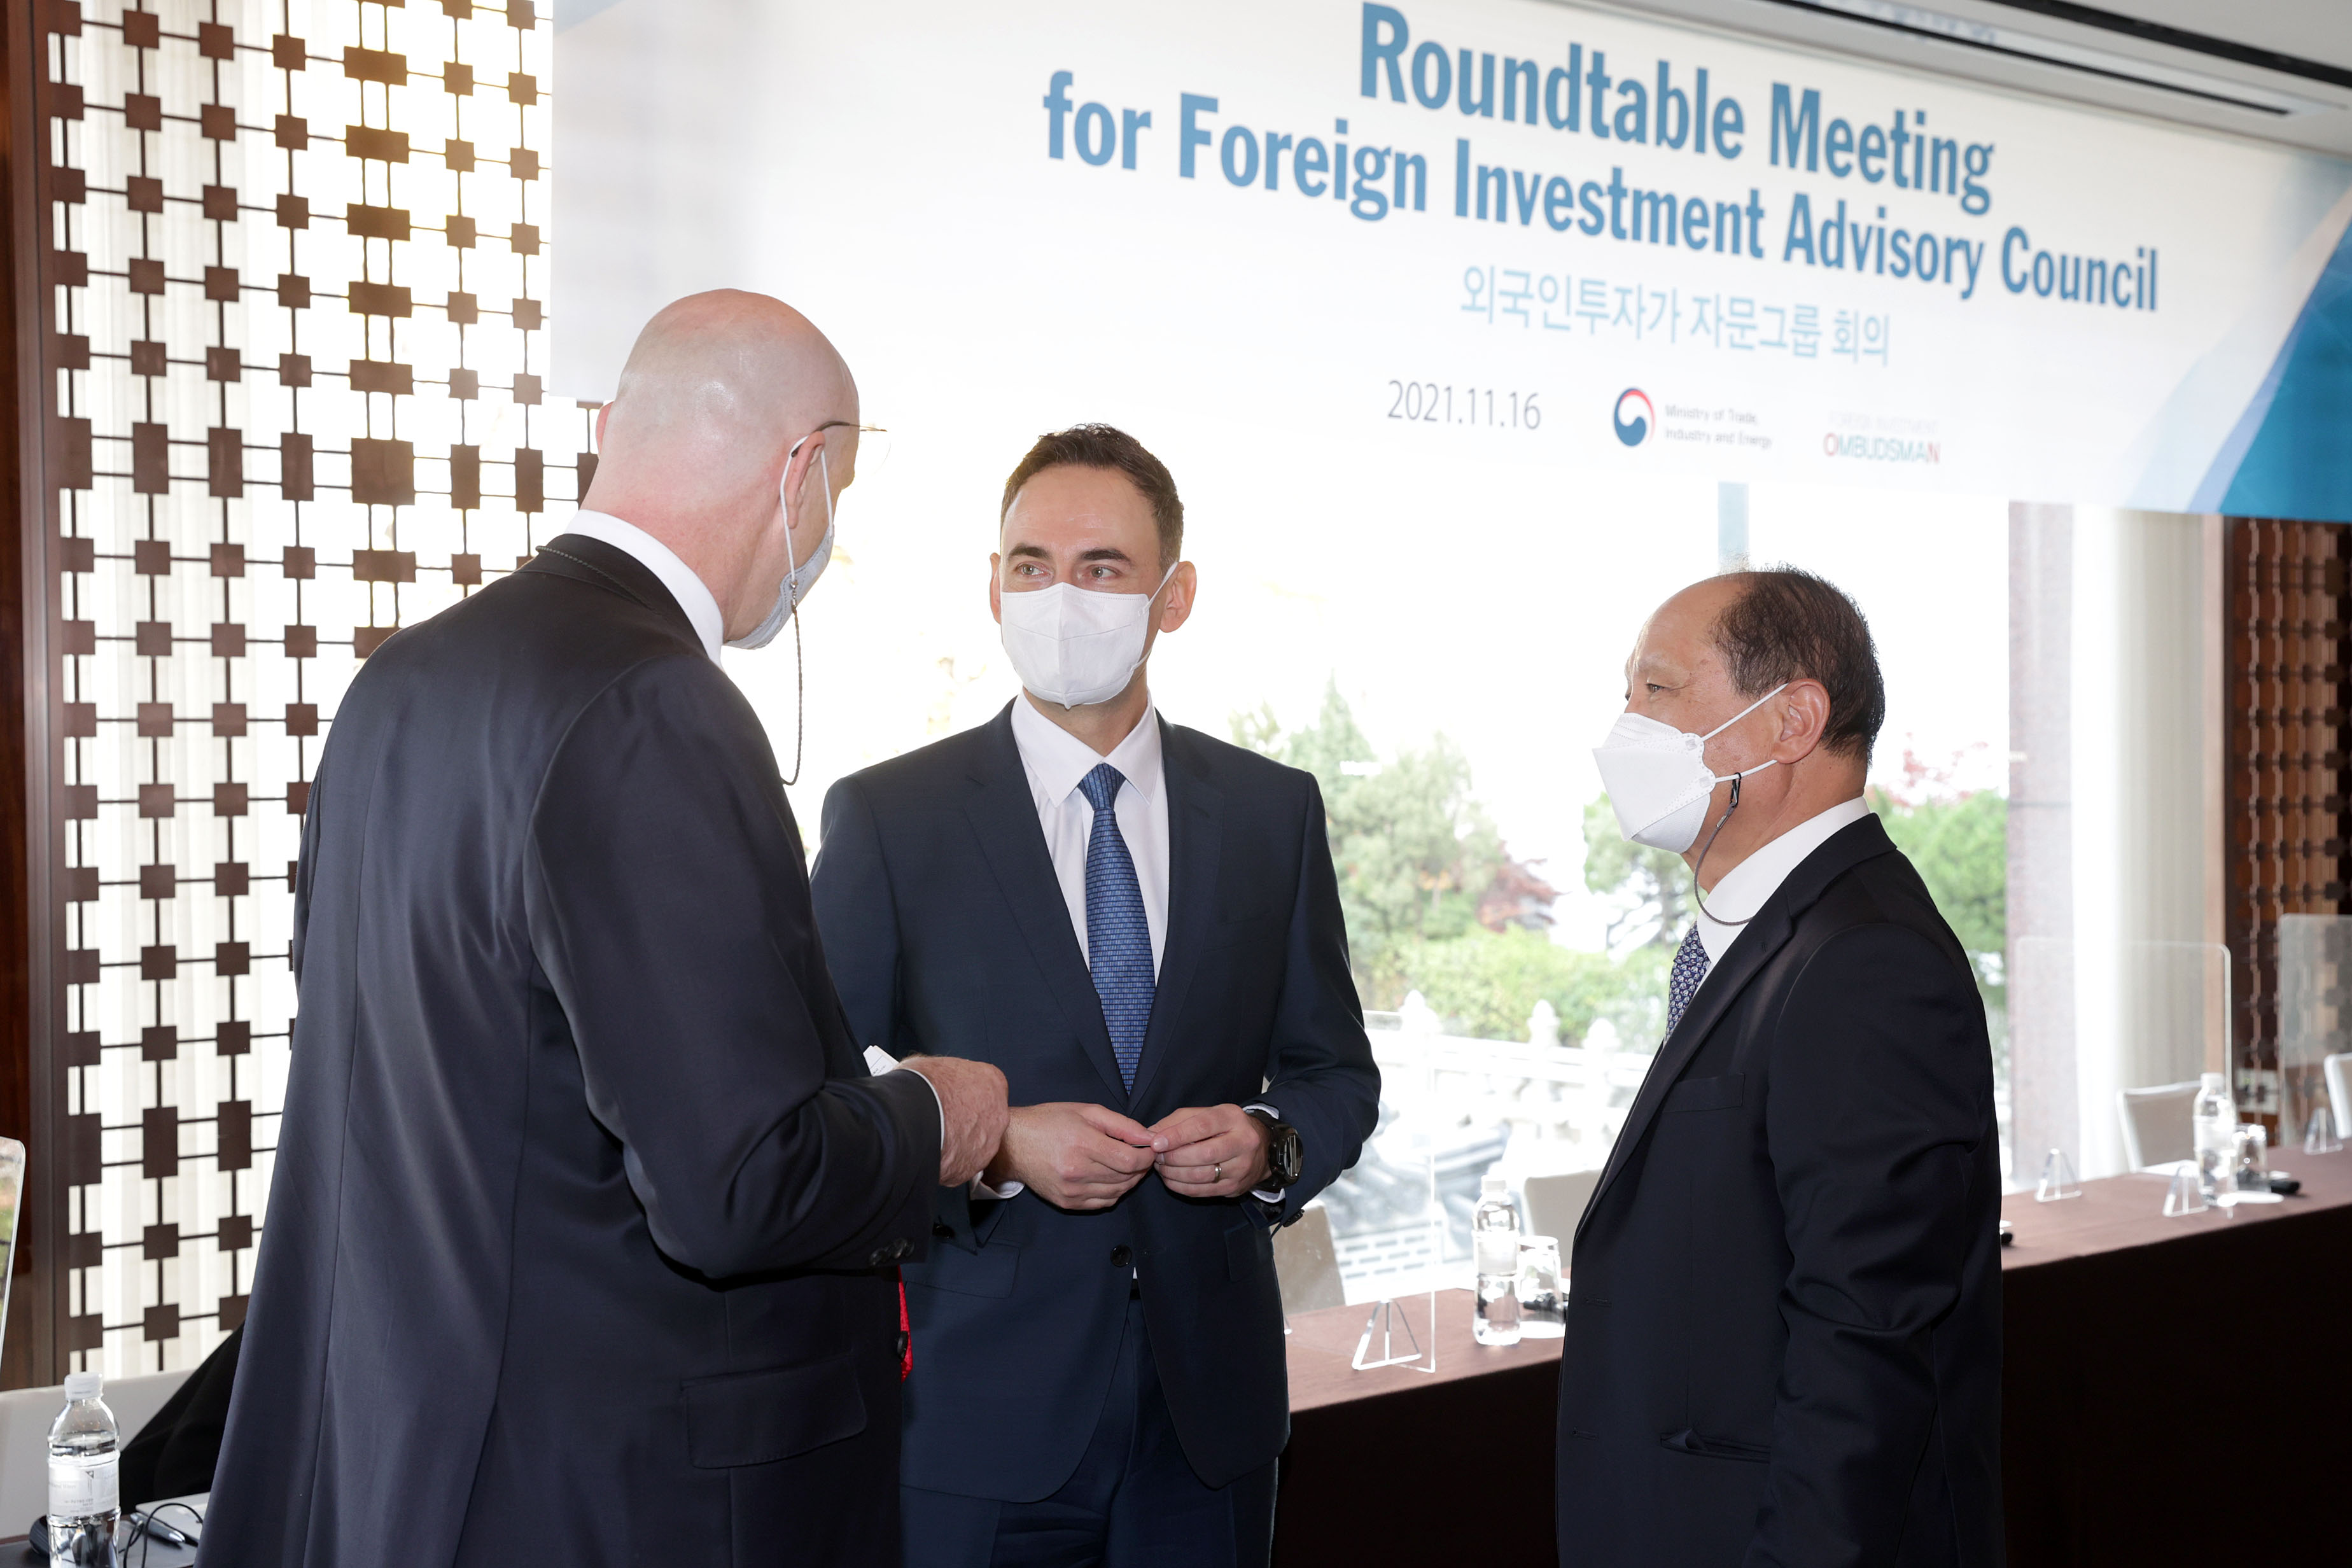 Roundtable Meeting for Foreign Investment Advisory Council